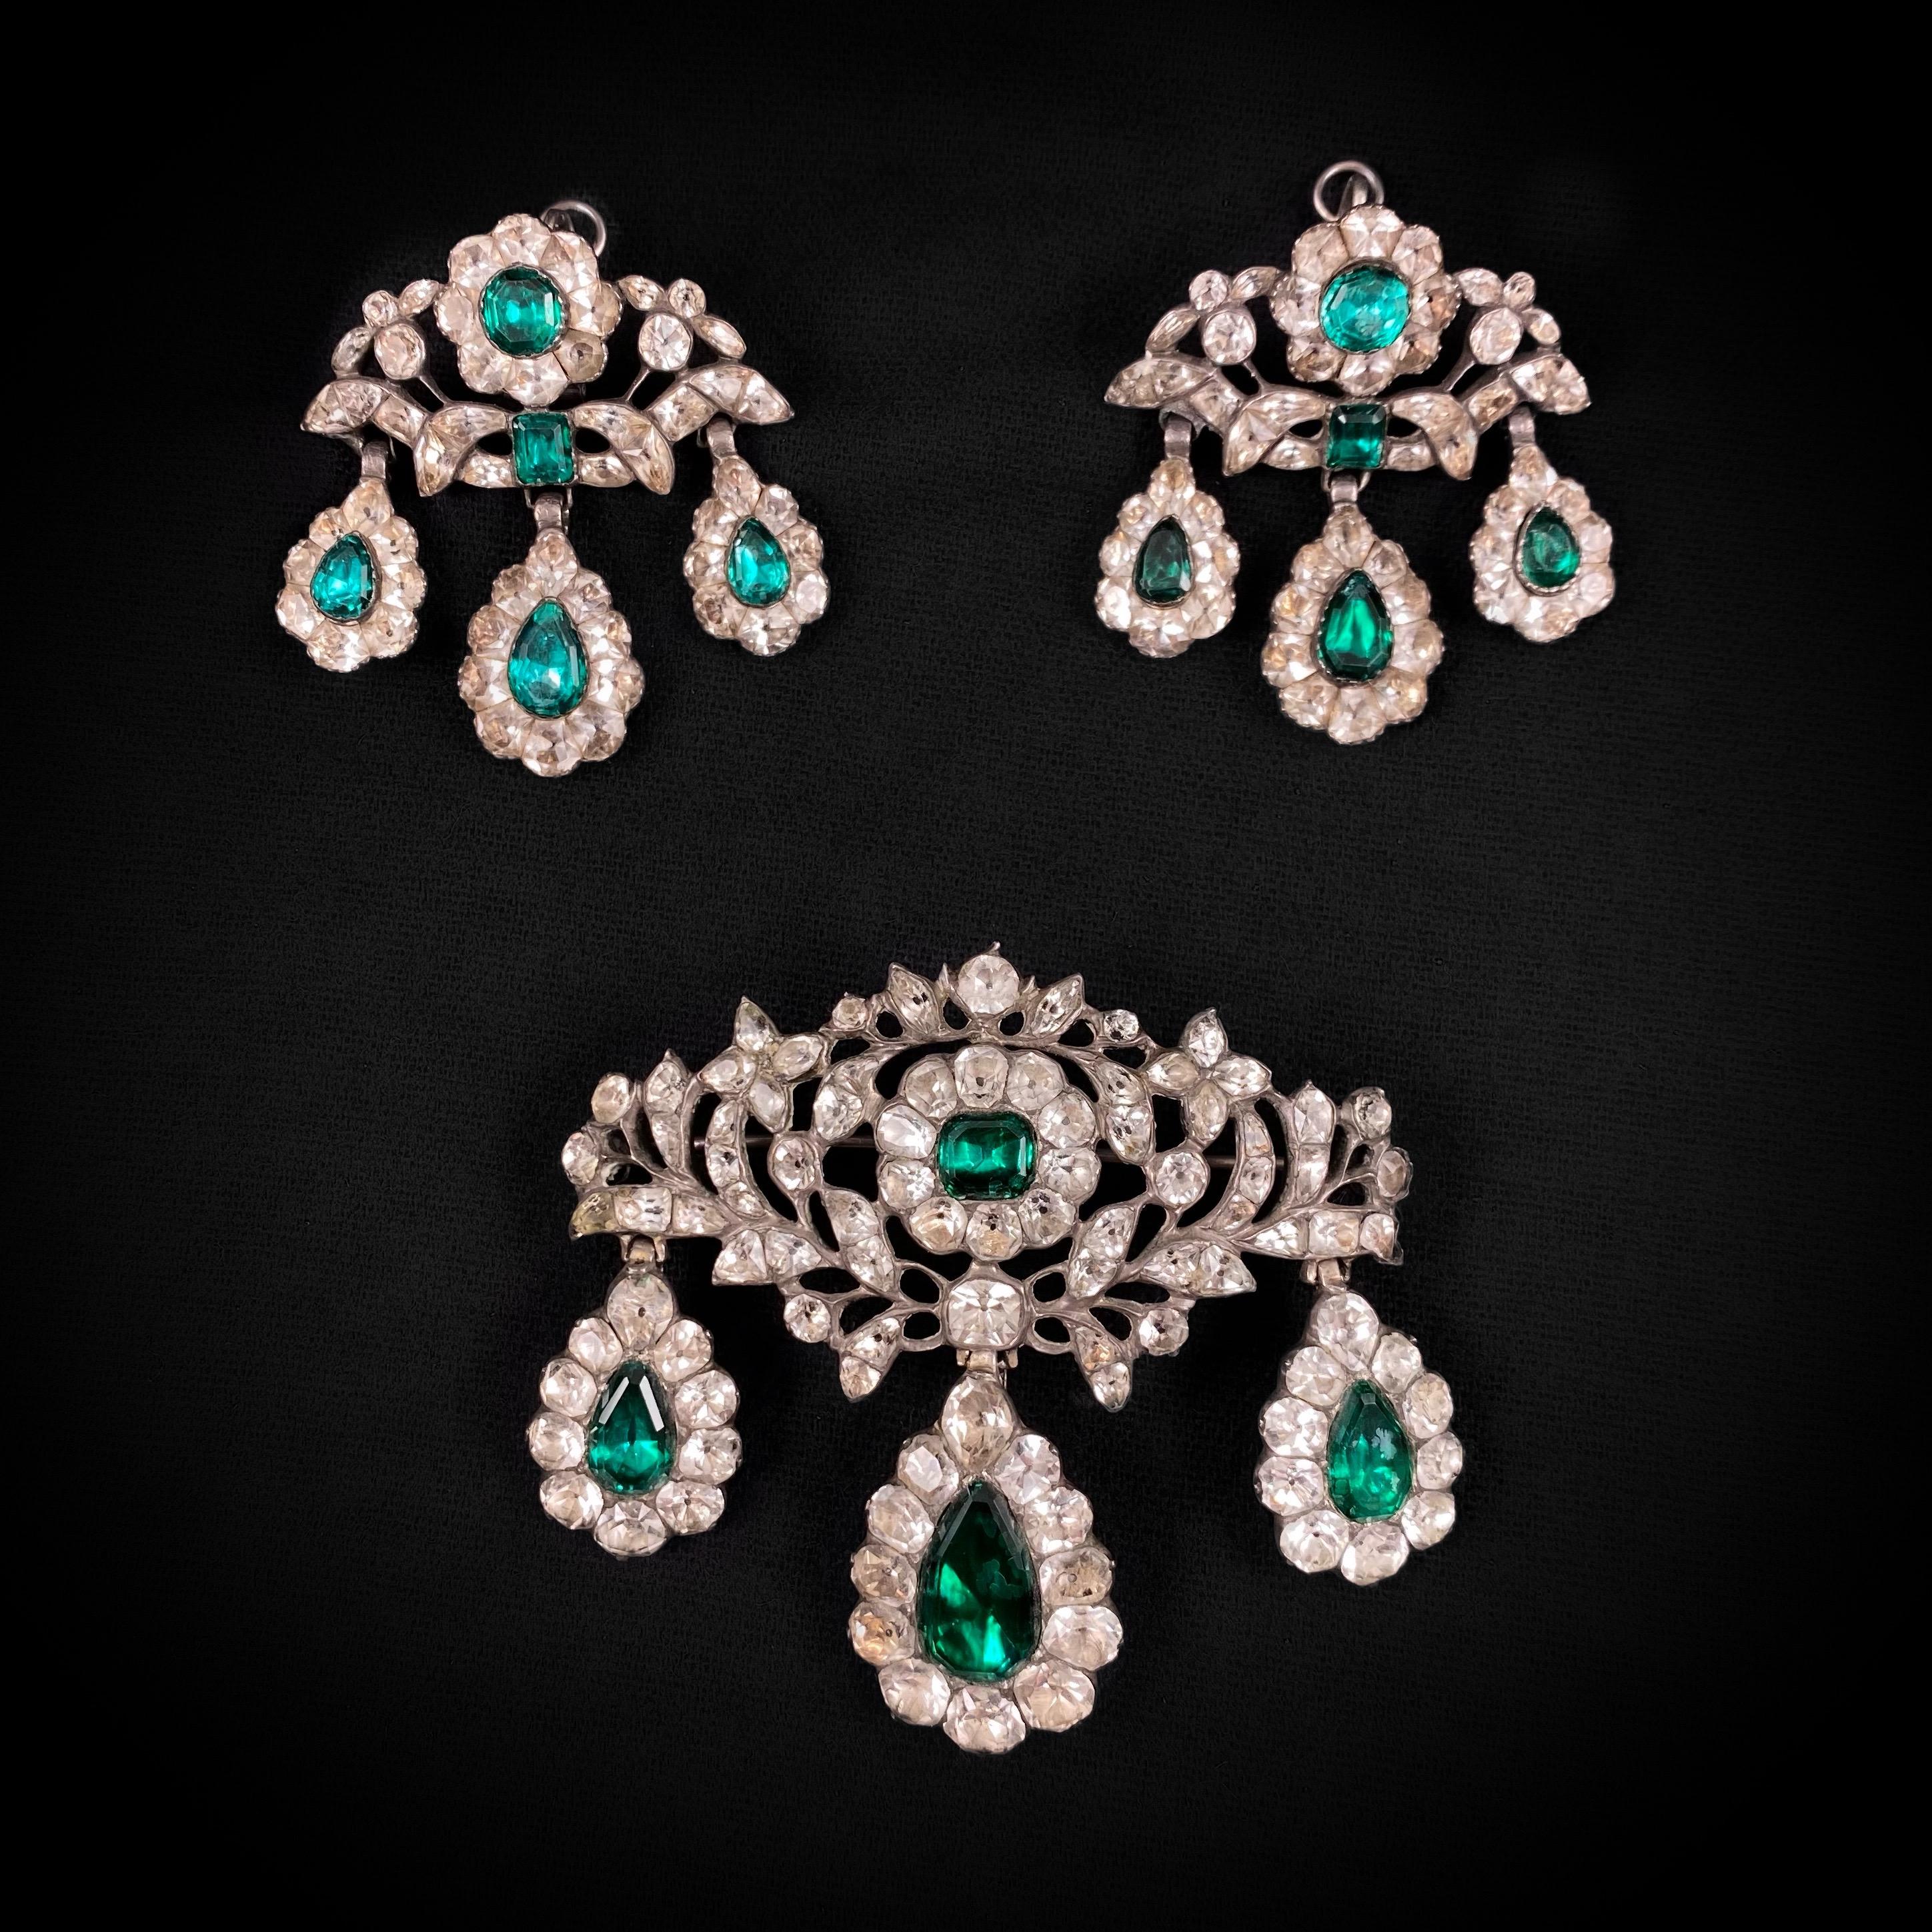 Antique 18th century “Minas Novas” rock crystal, colorless topaz and simulated-emerald doblet girandole earrings and pendant/brooch demi-parure, Portuguese, circa 1770. A spectacular antique jewelry set accented with “Minas Novas” rock crystal